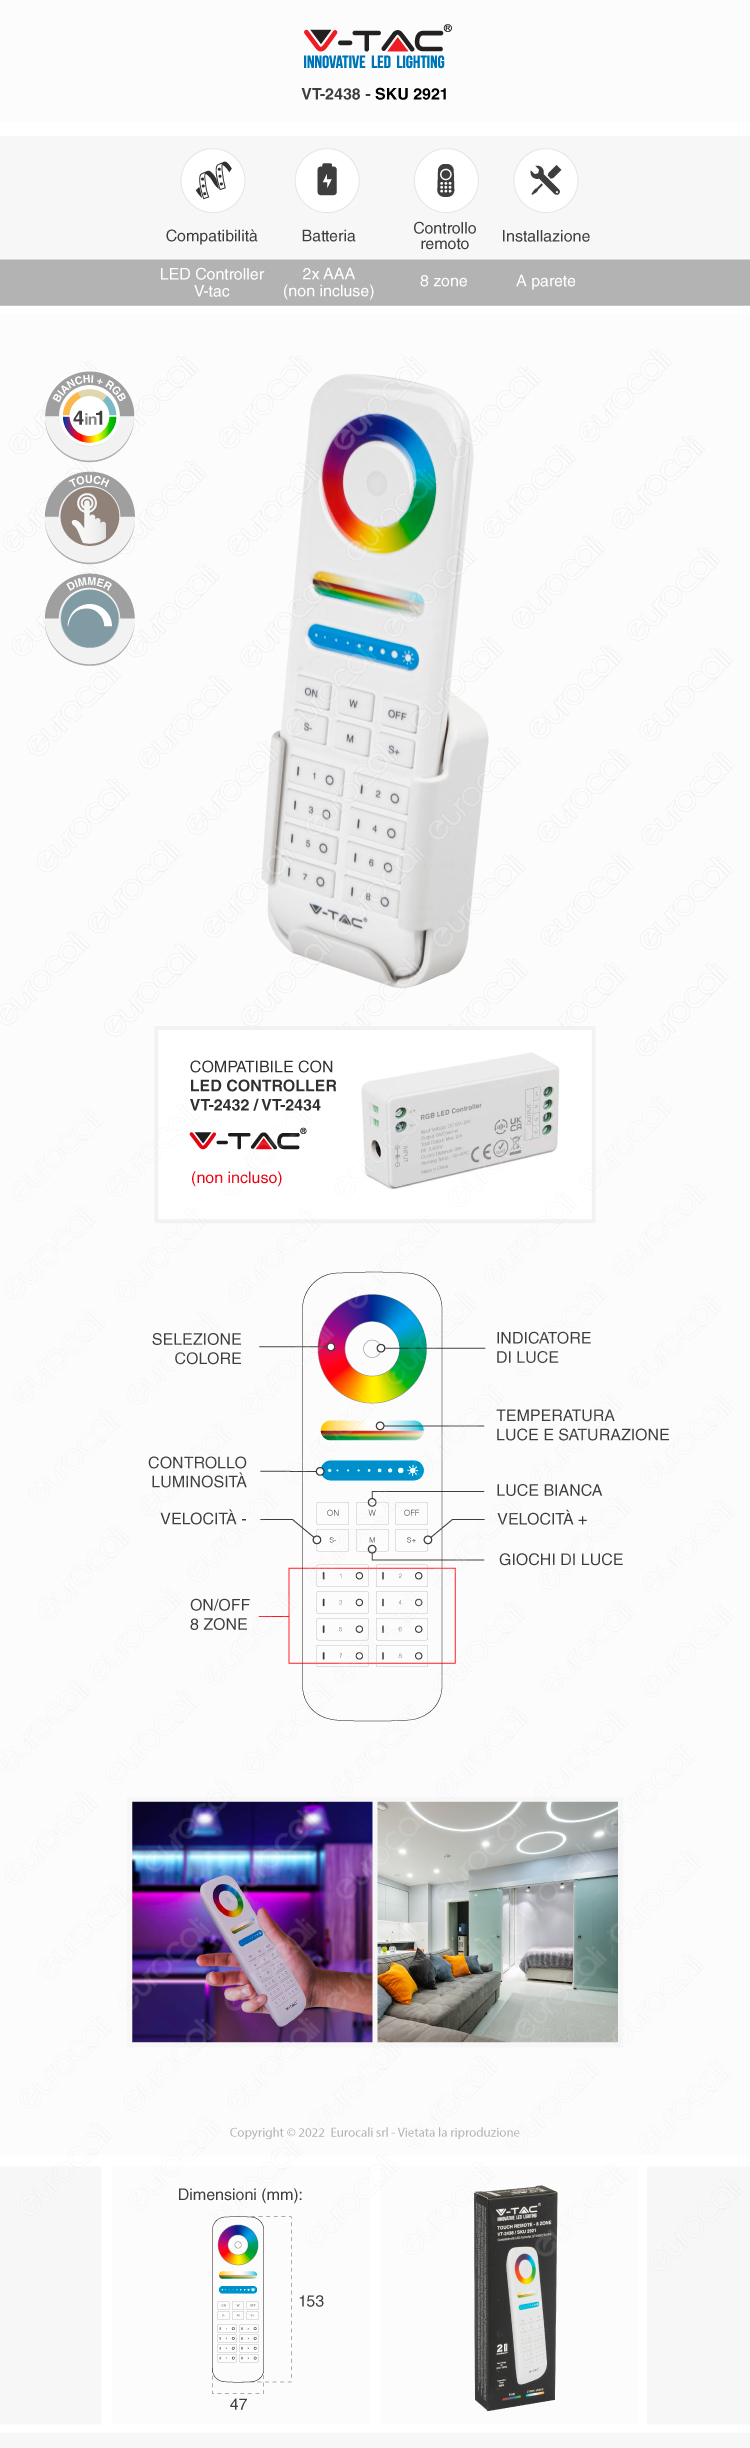 v-tac vt-2438 8-zone touch remote control wireless per controller strisce led rgb+w cct